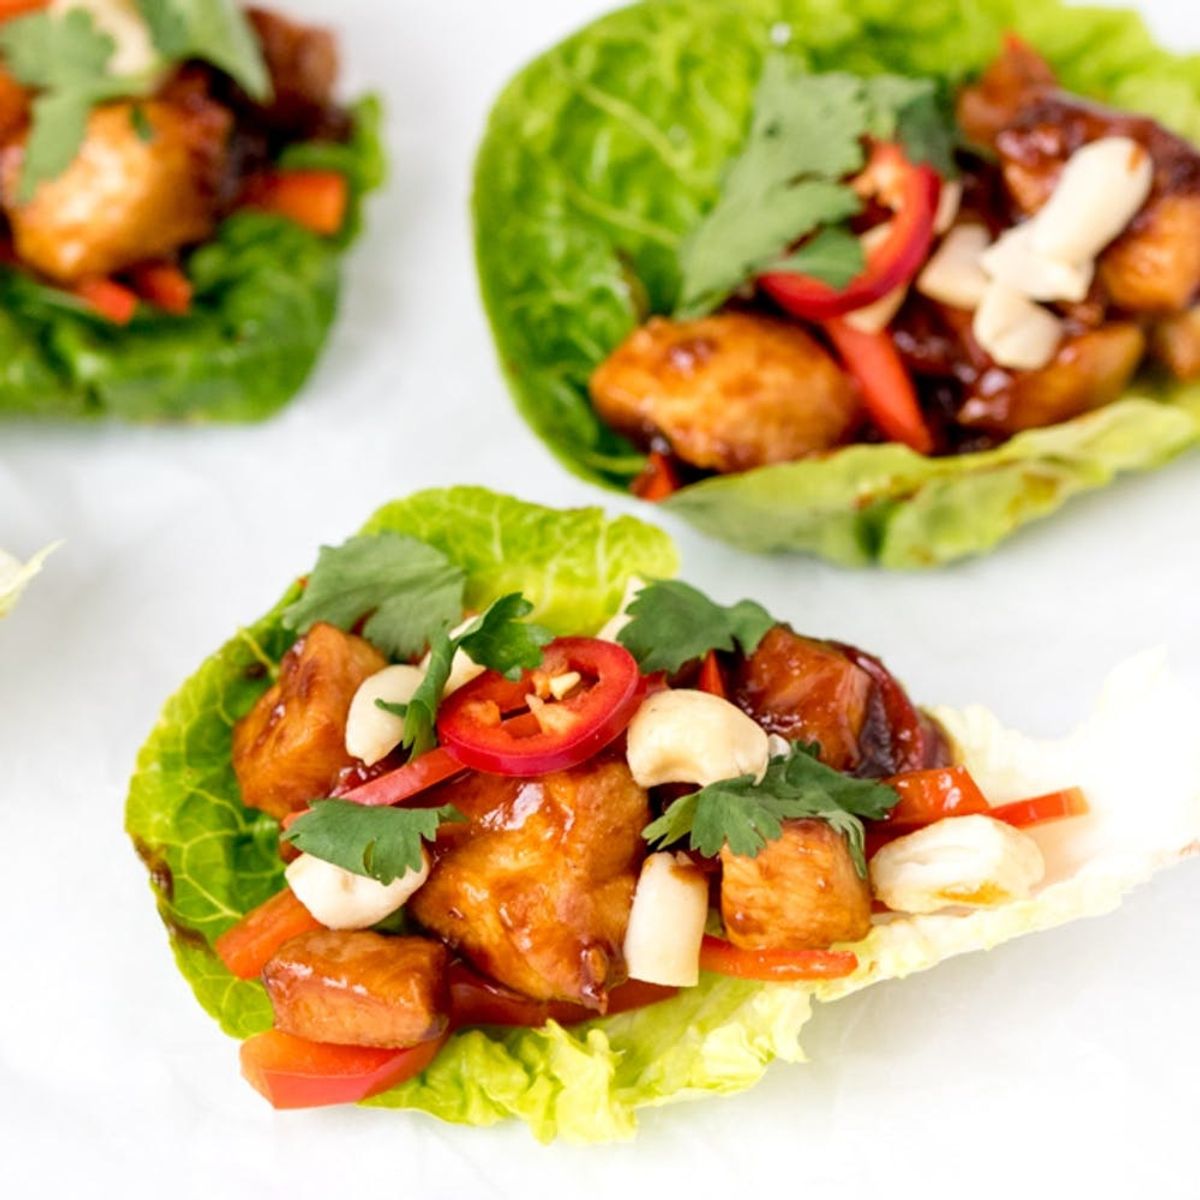 These Thai Chicken Lettuce Wraps Are Way Better Than Sandwiches for Lunch